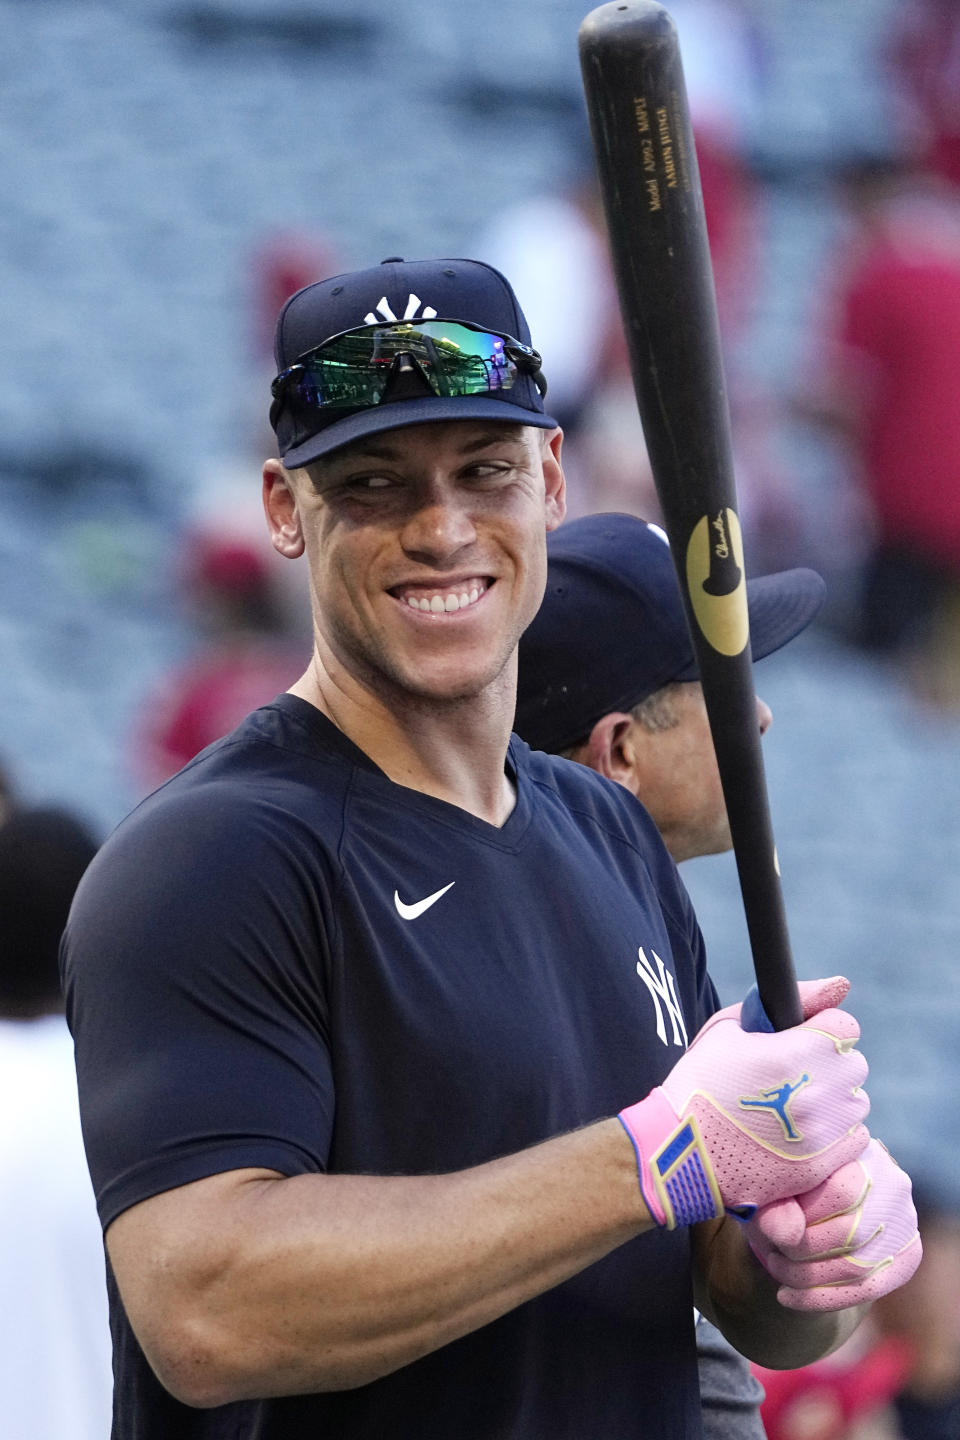 New York Yankees' Aaron Judge, left, smiles during batting practice as manager Aaron Boone stands by prior to a baseball game against the Los Angeles Angels Tuesday, July 18, 2023, in Anaheim, Calif. (AP Photo/Mark J. Terrill)